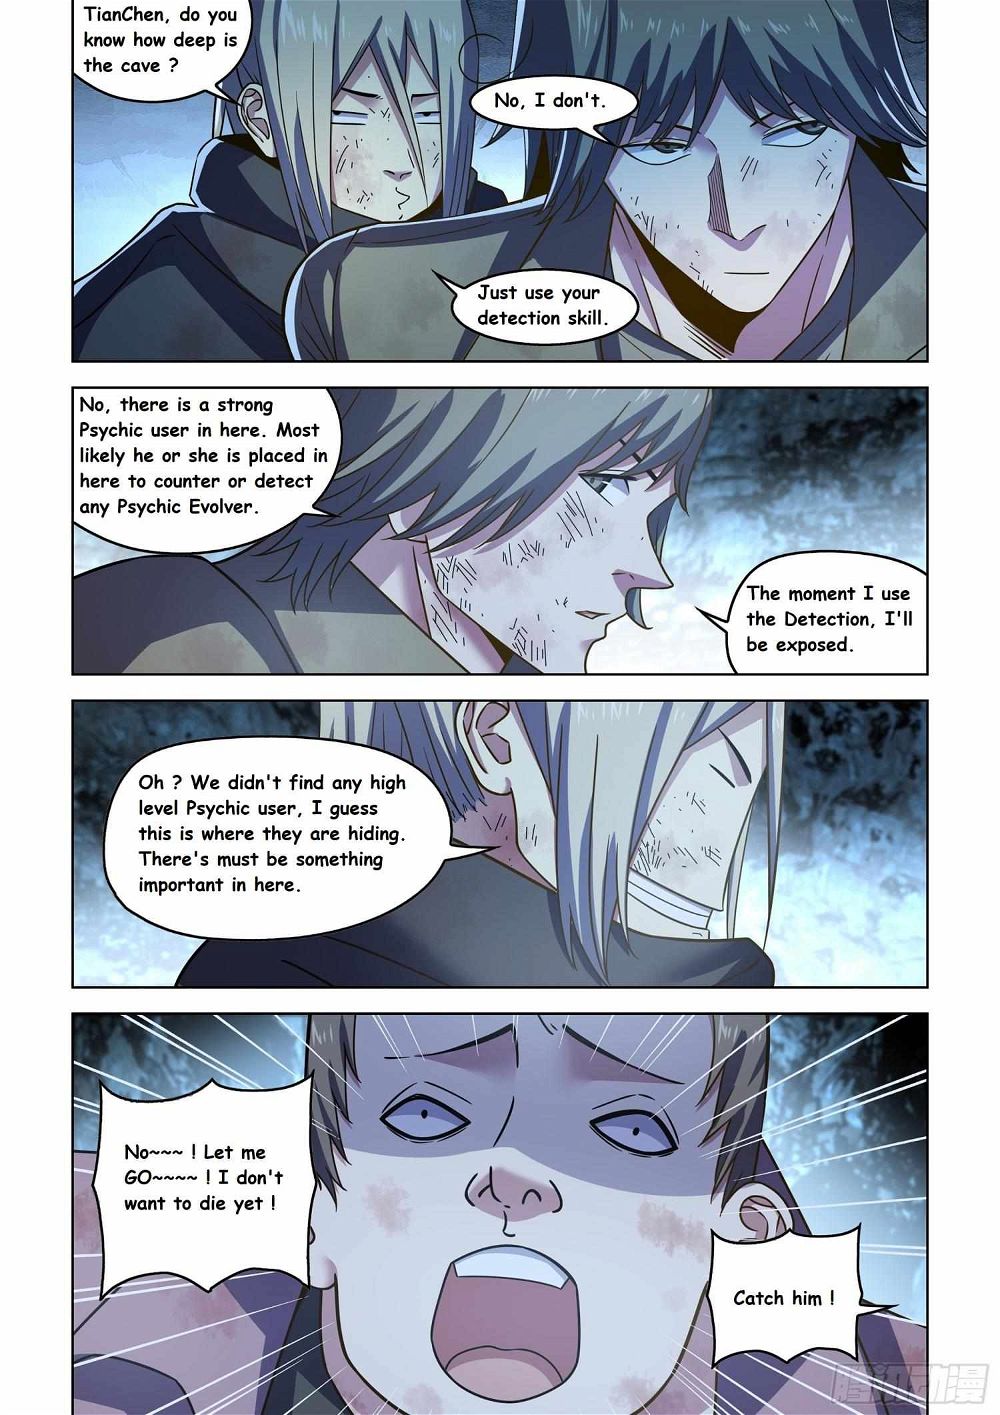 The Last Human Chapter 536.1 - Page 7